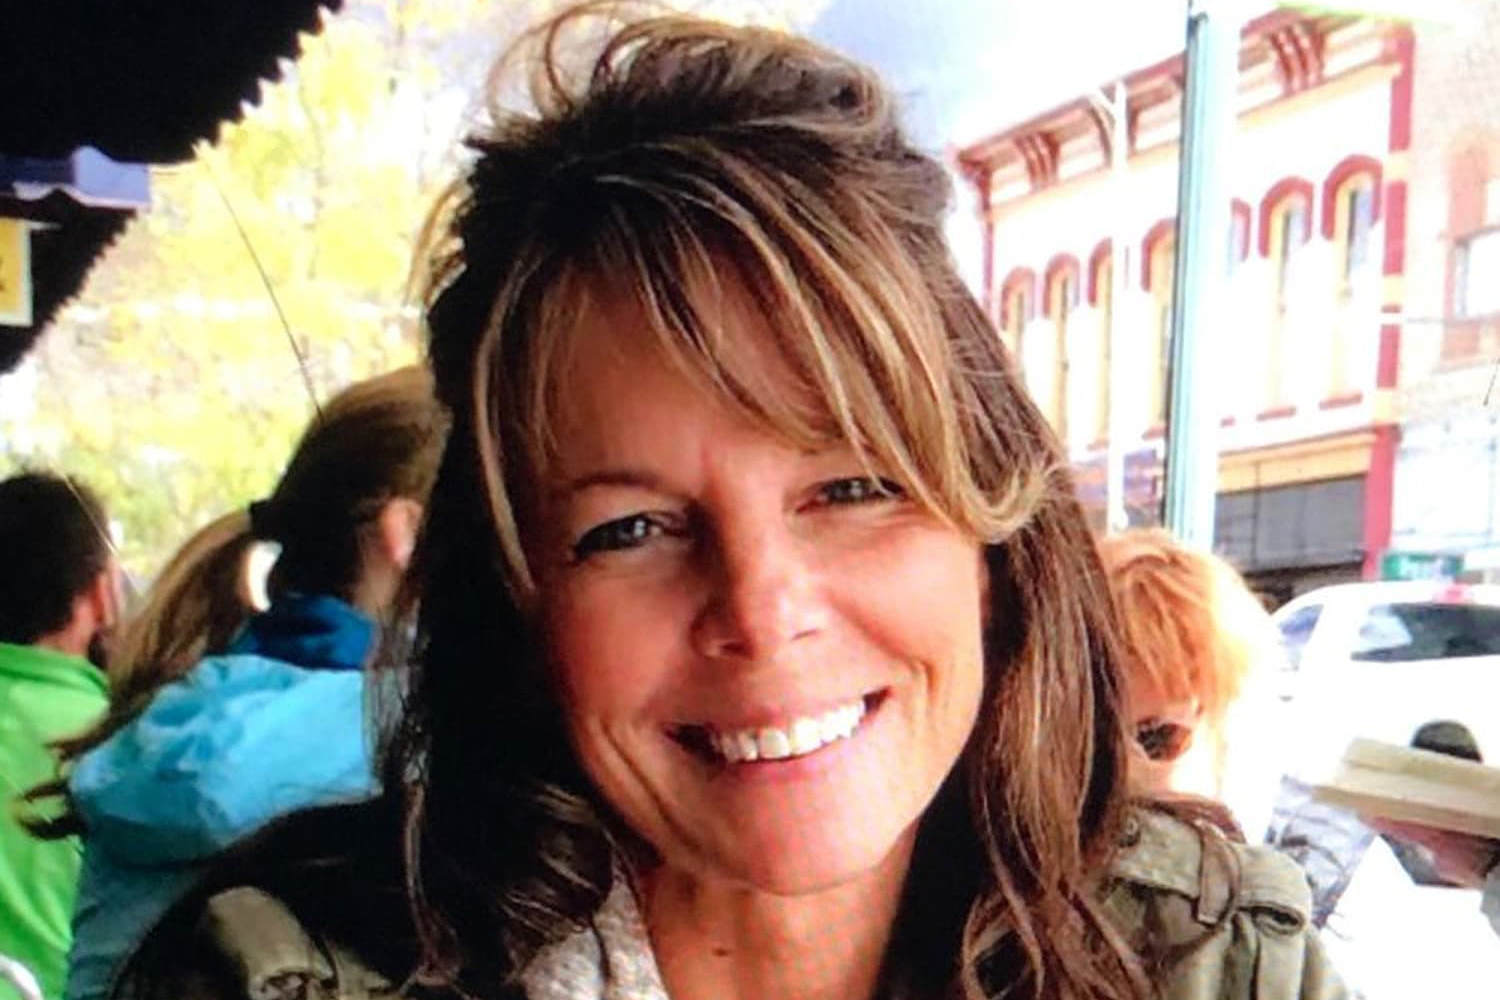 Colorado mom who went missing in 2020 died by homicide, autopsy says